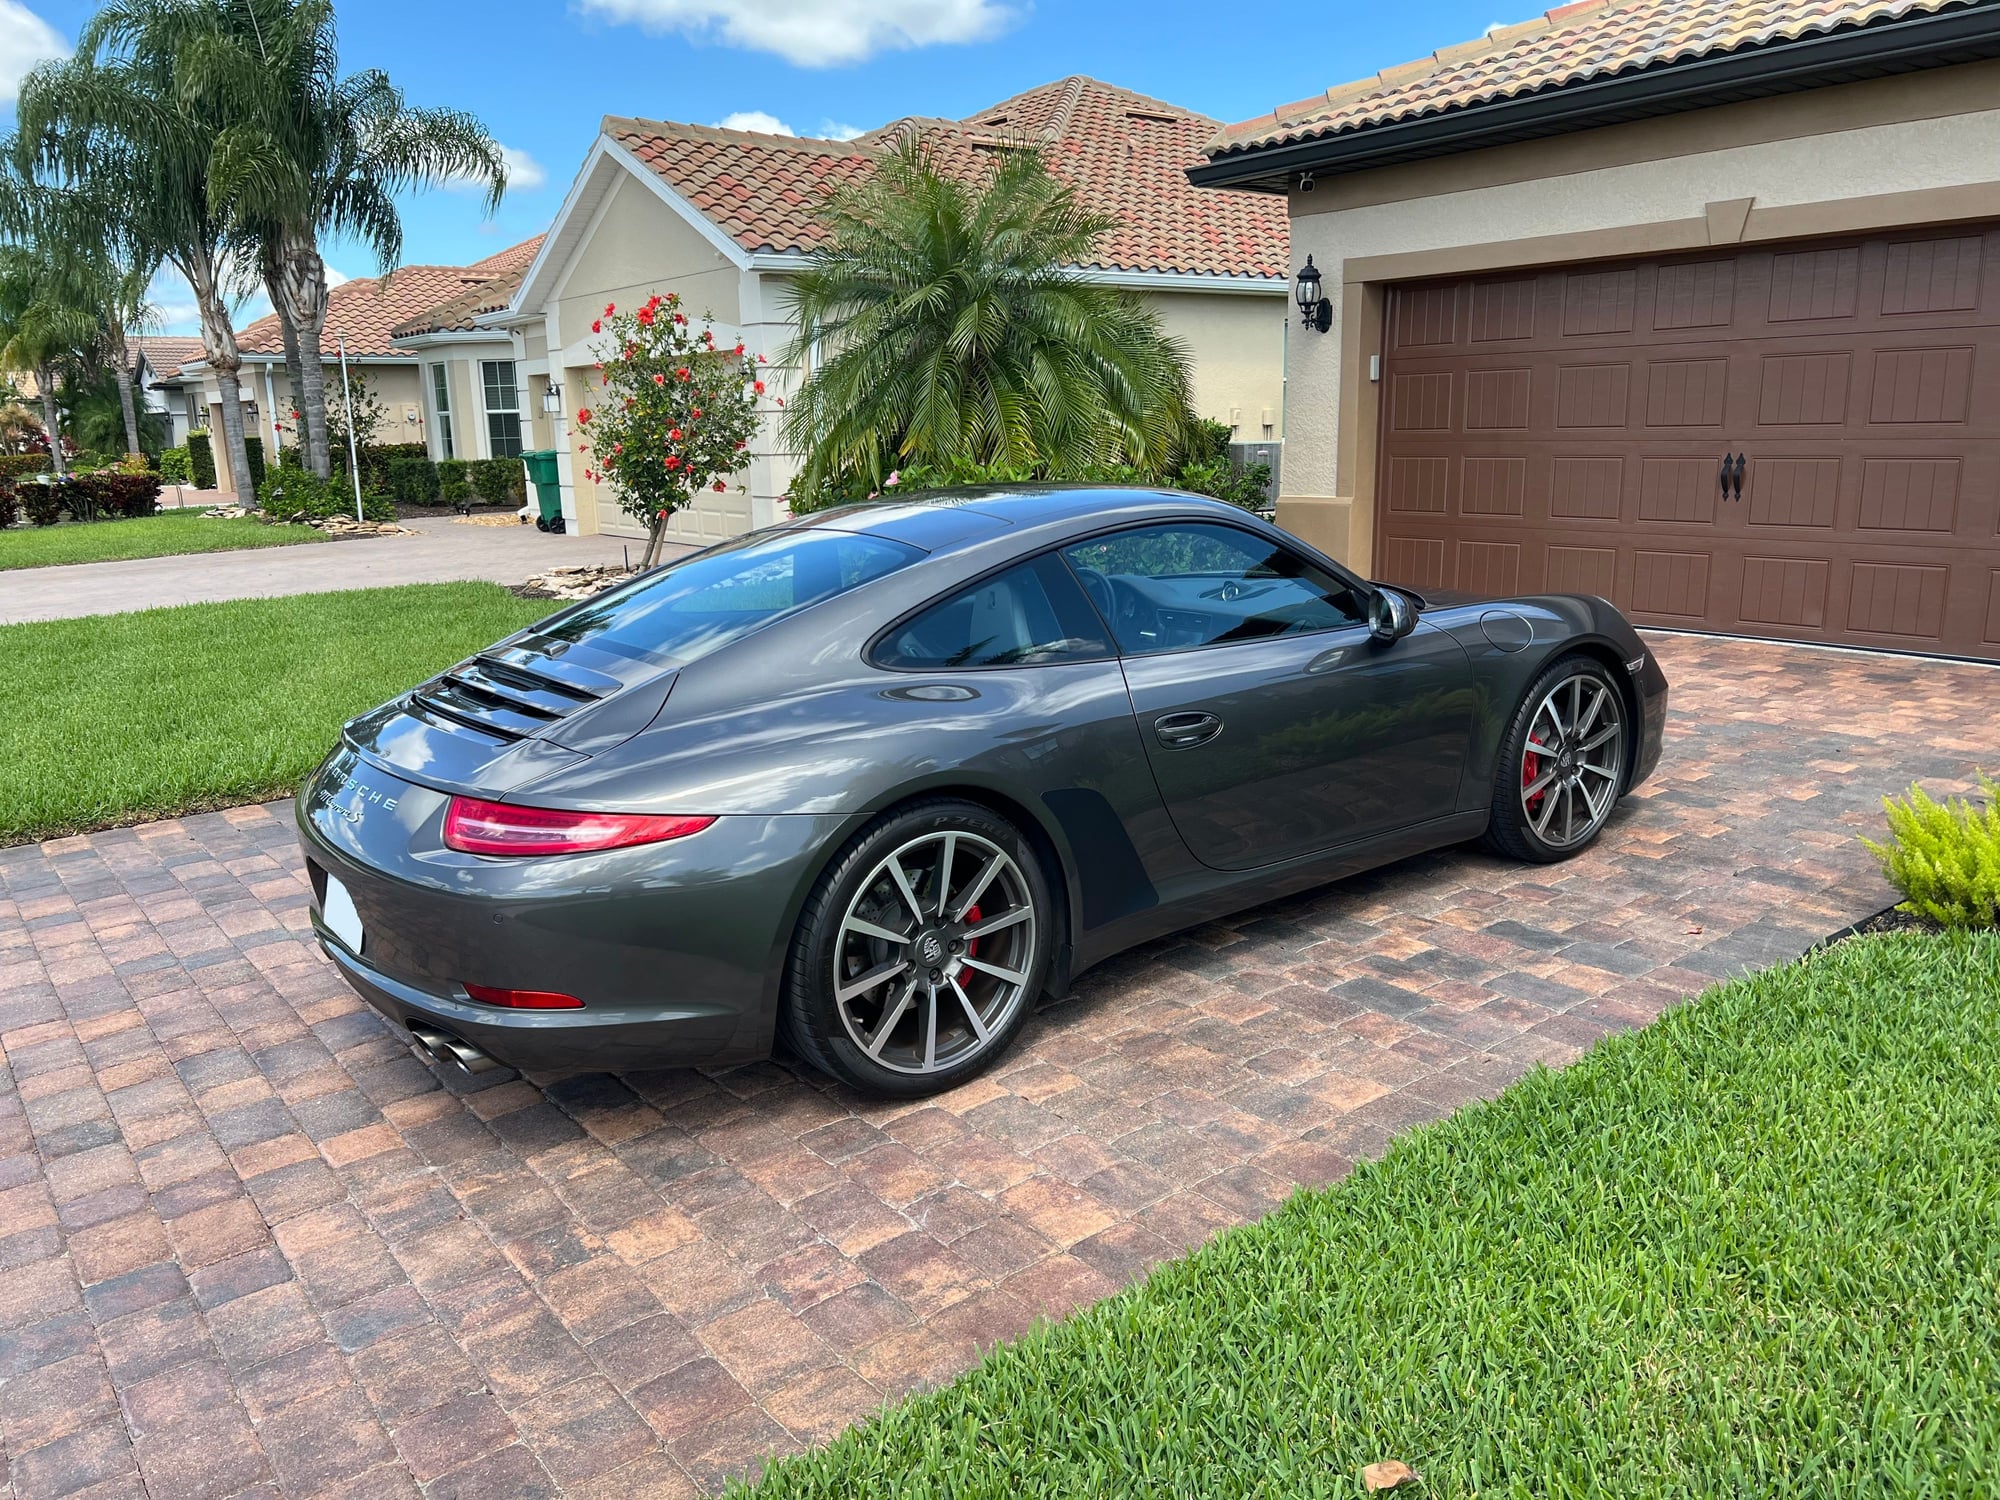 2013 Porsche 911 - 2013 Porsche 911 Carrera S PDK - Used - VIN WP0AB2A94DS121244 - 68,935 Miles - 6 cyl - 2WD - Automatic - Coupe - Gray - Ave Maria, FL 34142, United States